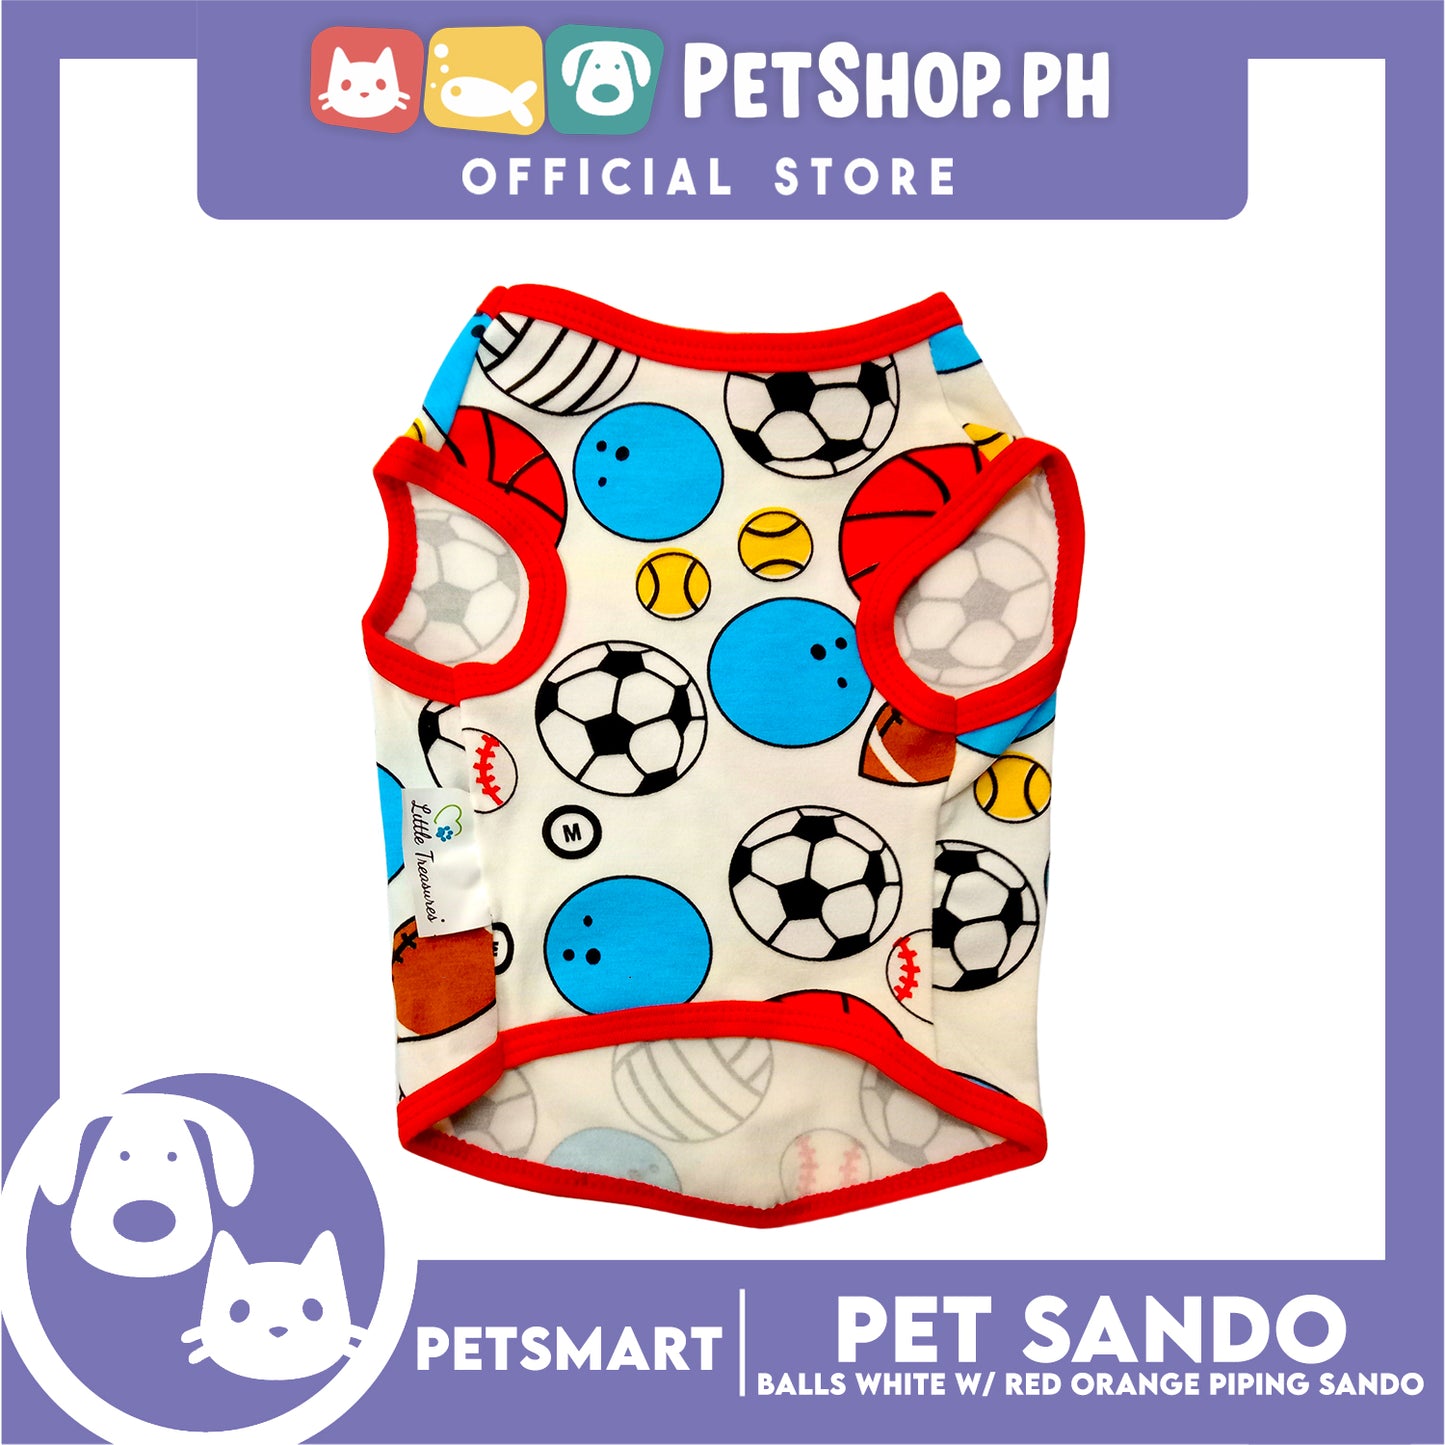 Pet Sando Balls Design, White with Red Orange Color Piping Sando (Large) Perfect Fit for Dogs and Cats